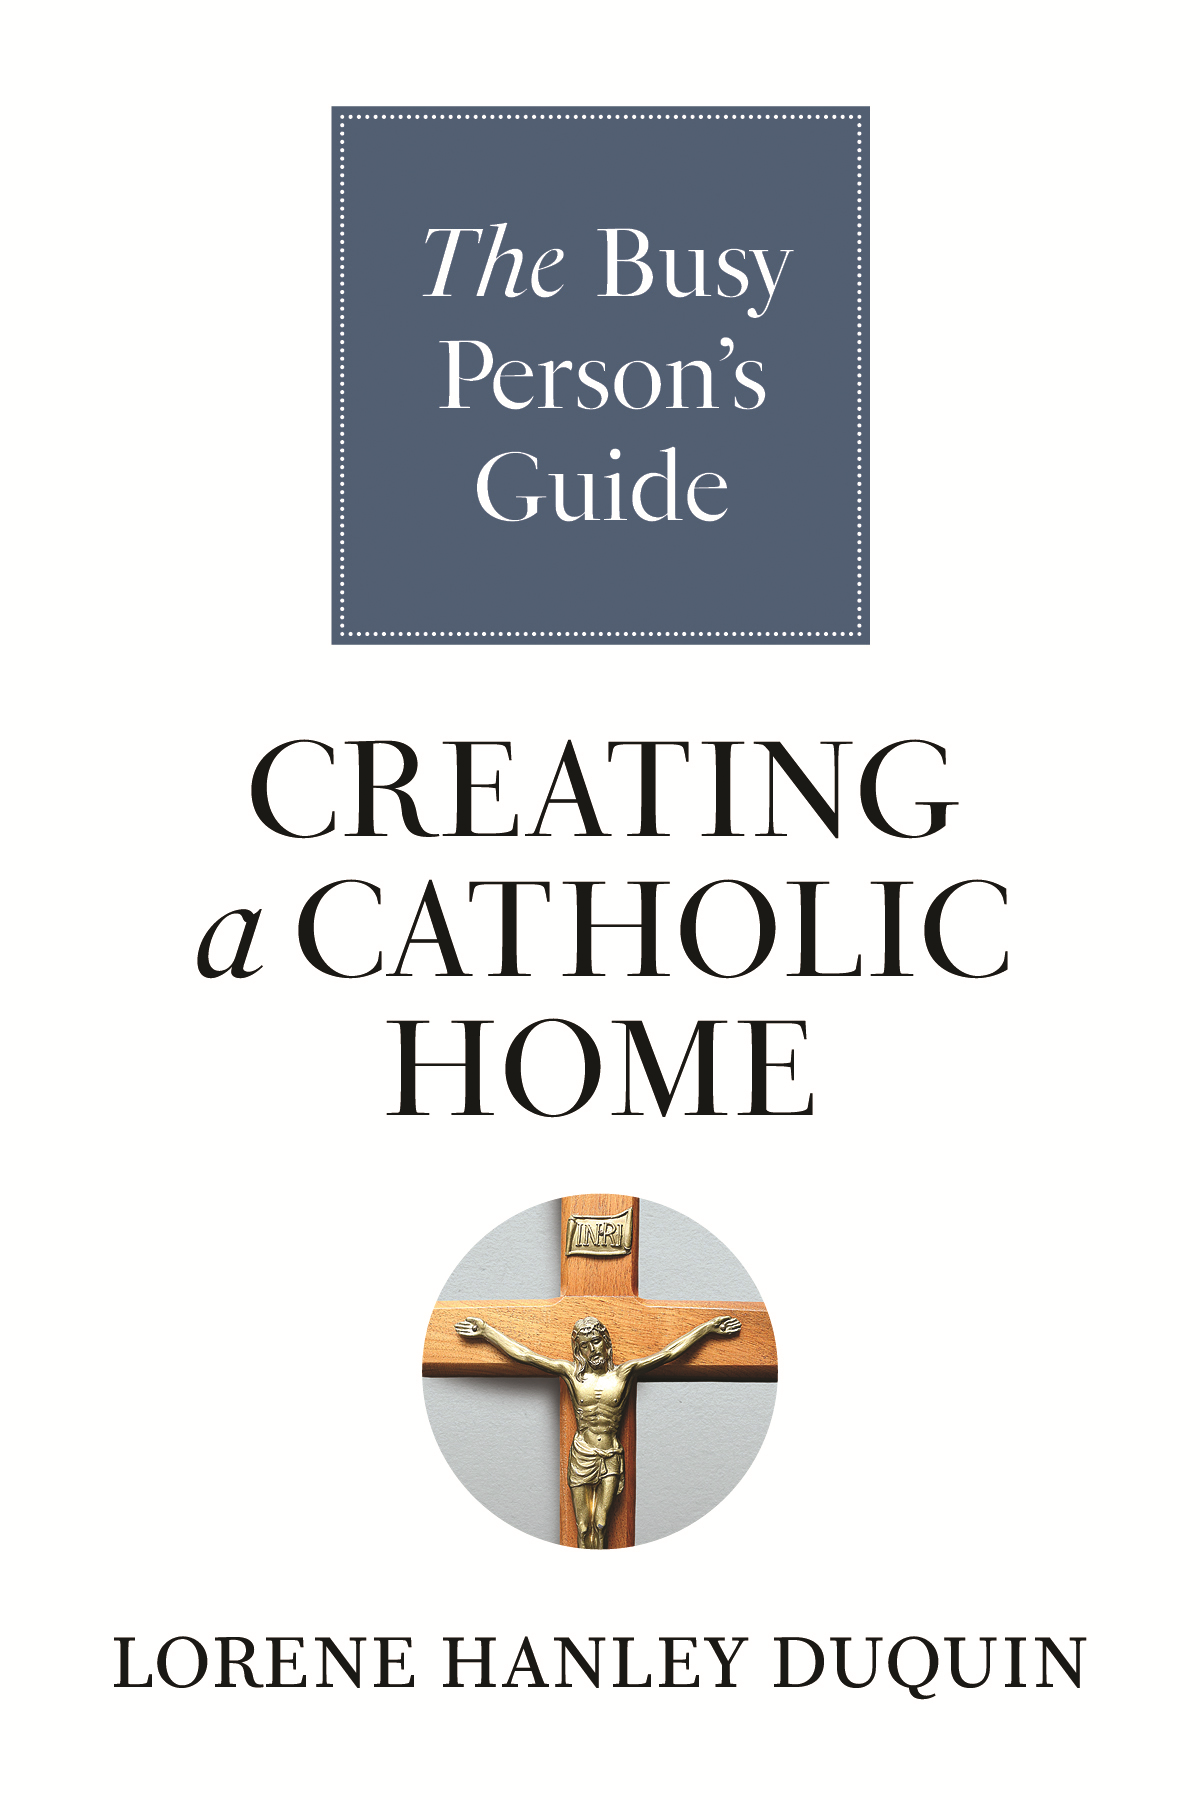 Creating a Catholic Home features the right combination of background information, spiritual insight, and practical tips for putting faith into practice.